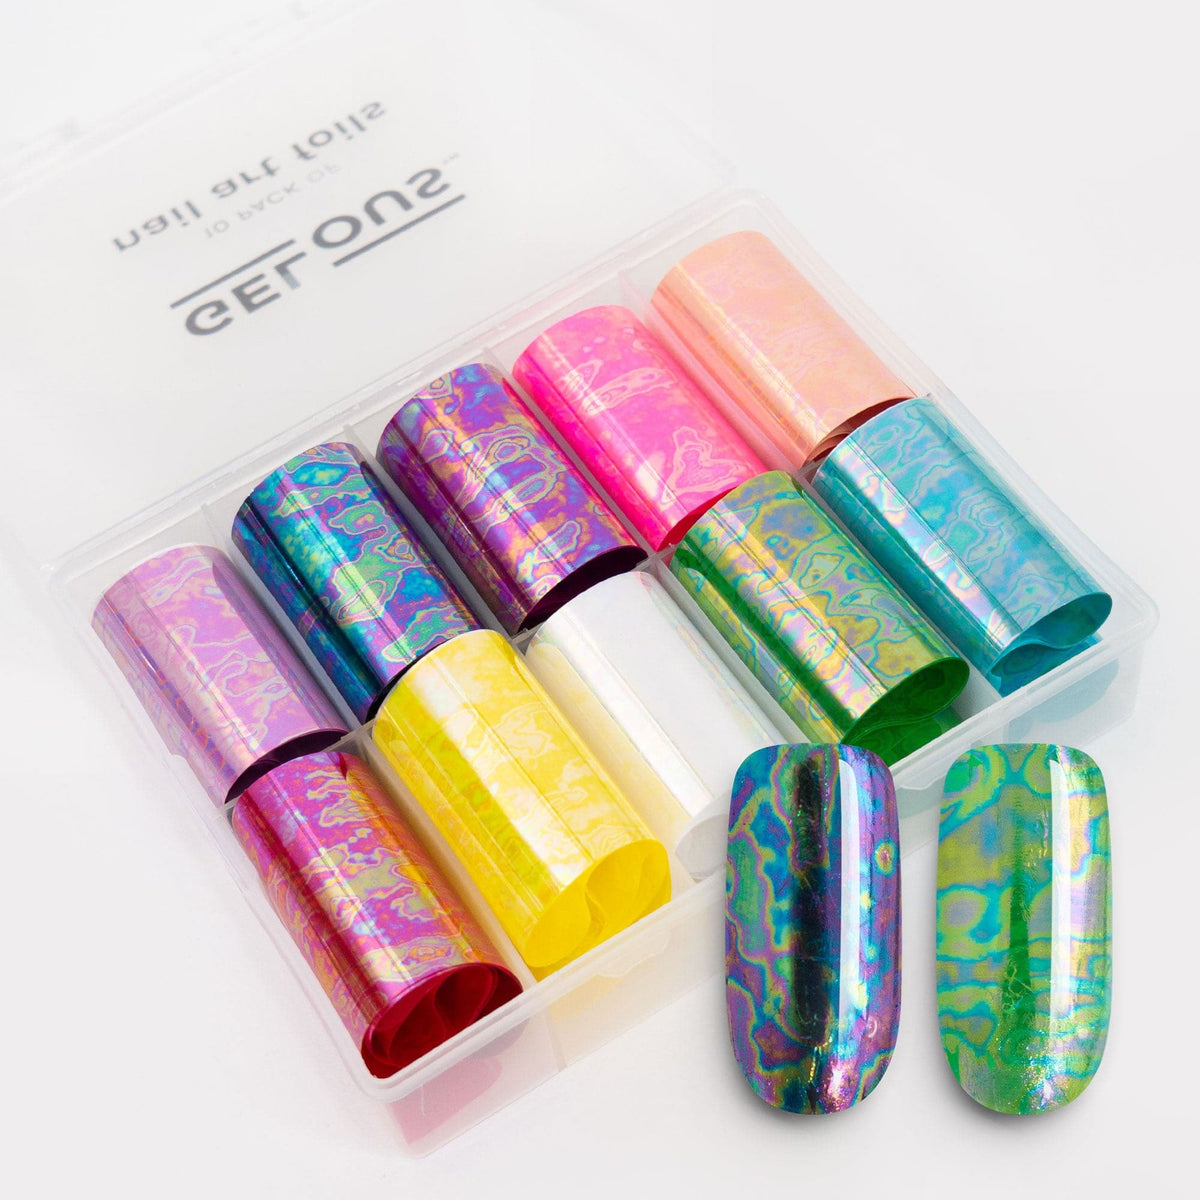 Gelous Colourful Iridescence Nail Art Foils sproduct photo - photographed in New Zealand